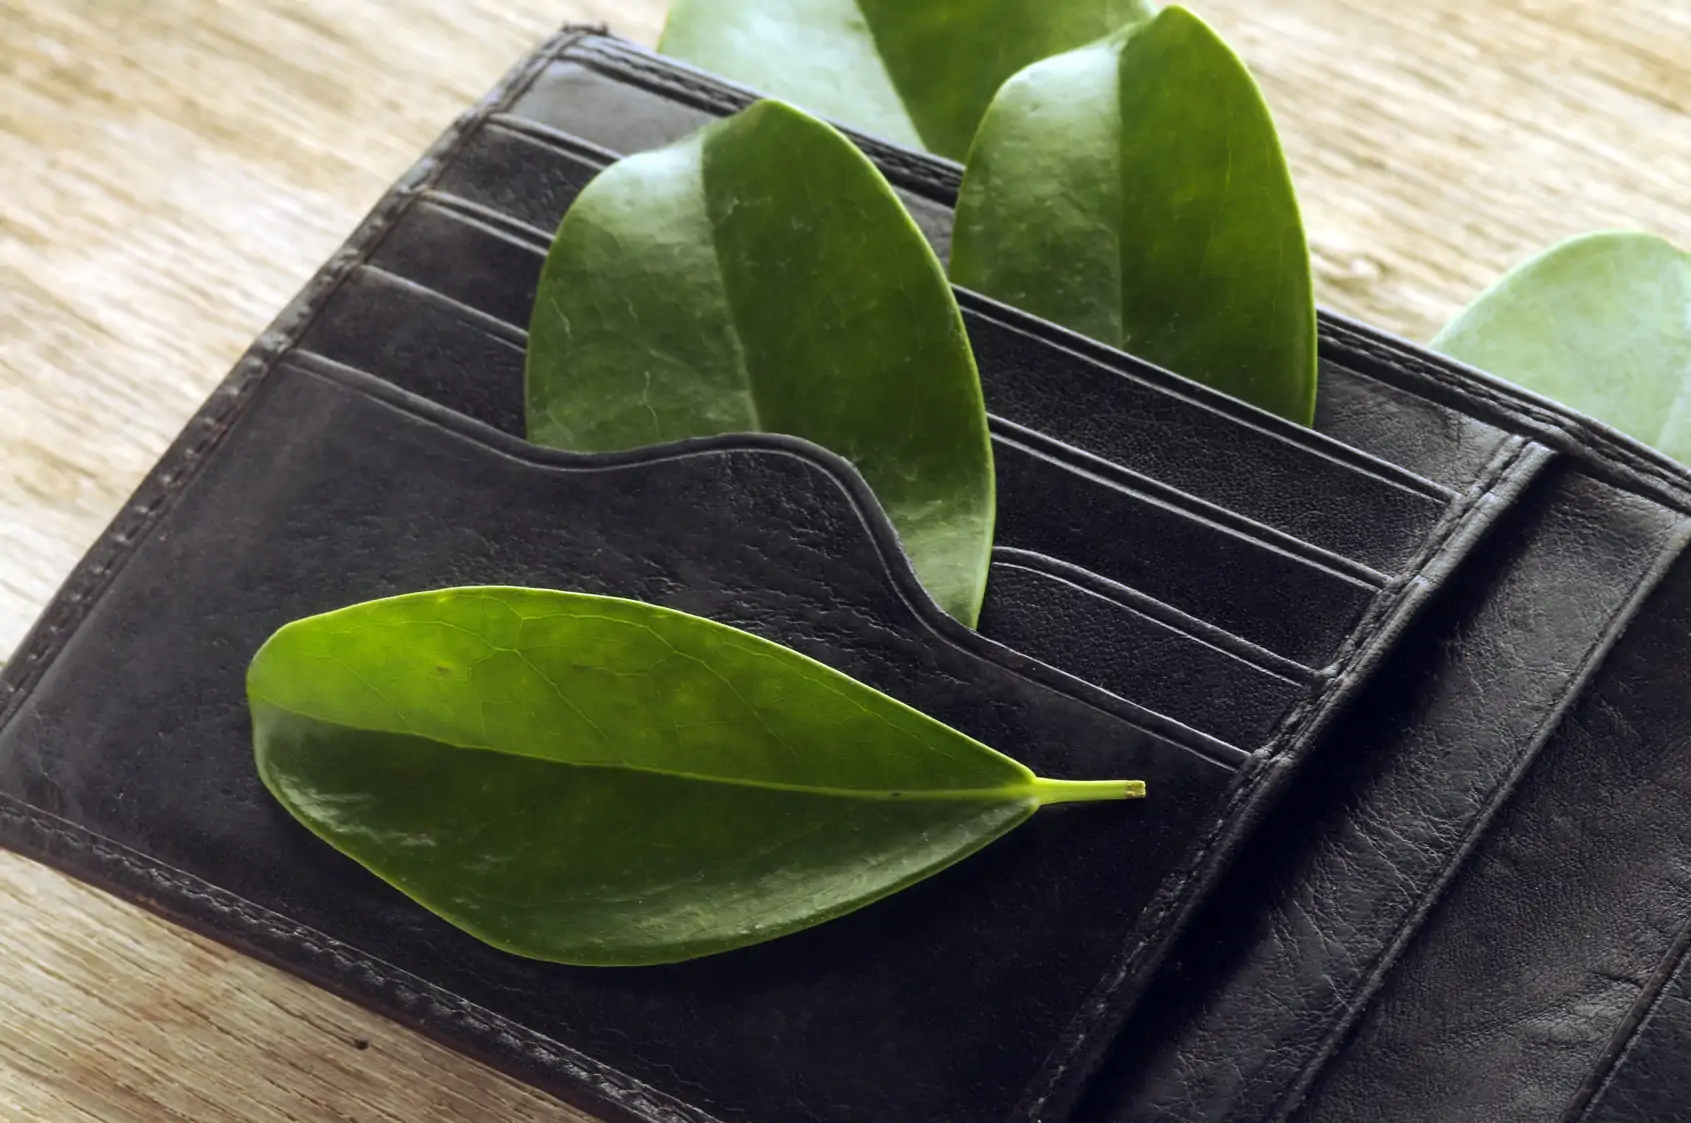 Artificial leather wallet with plant leaves inserted where cards would normally be